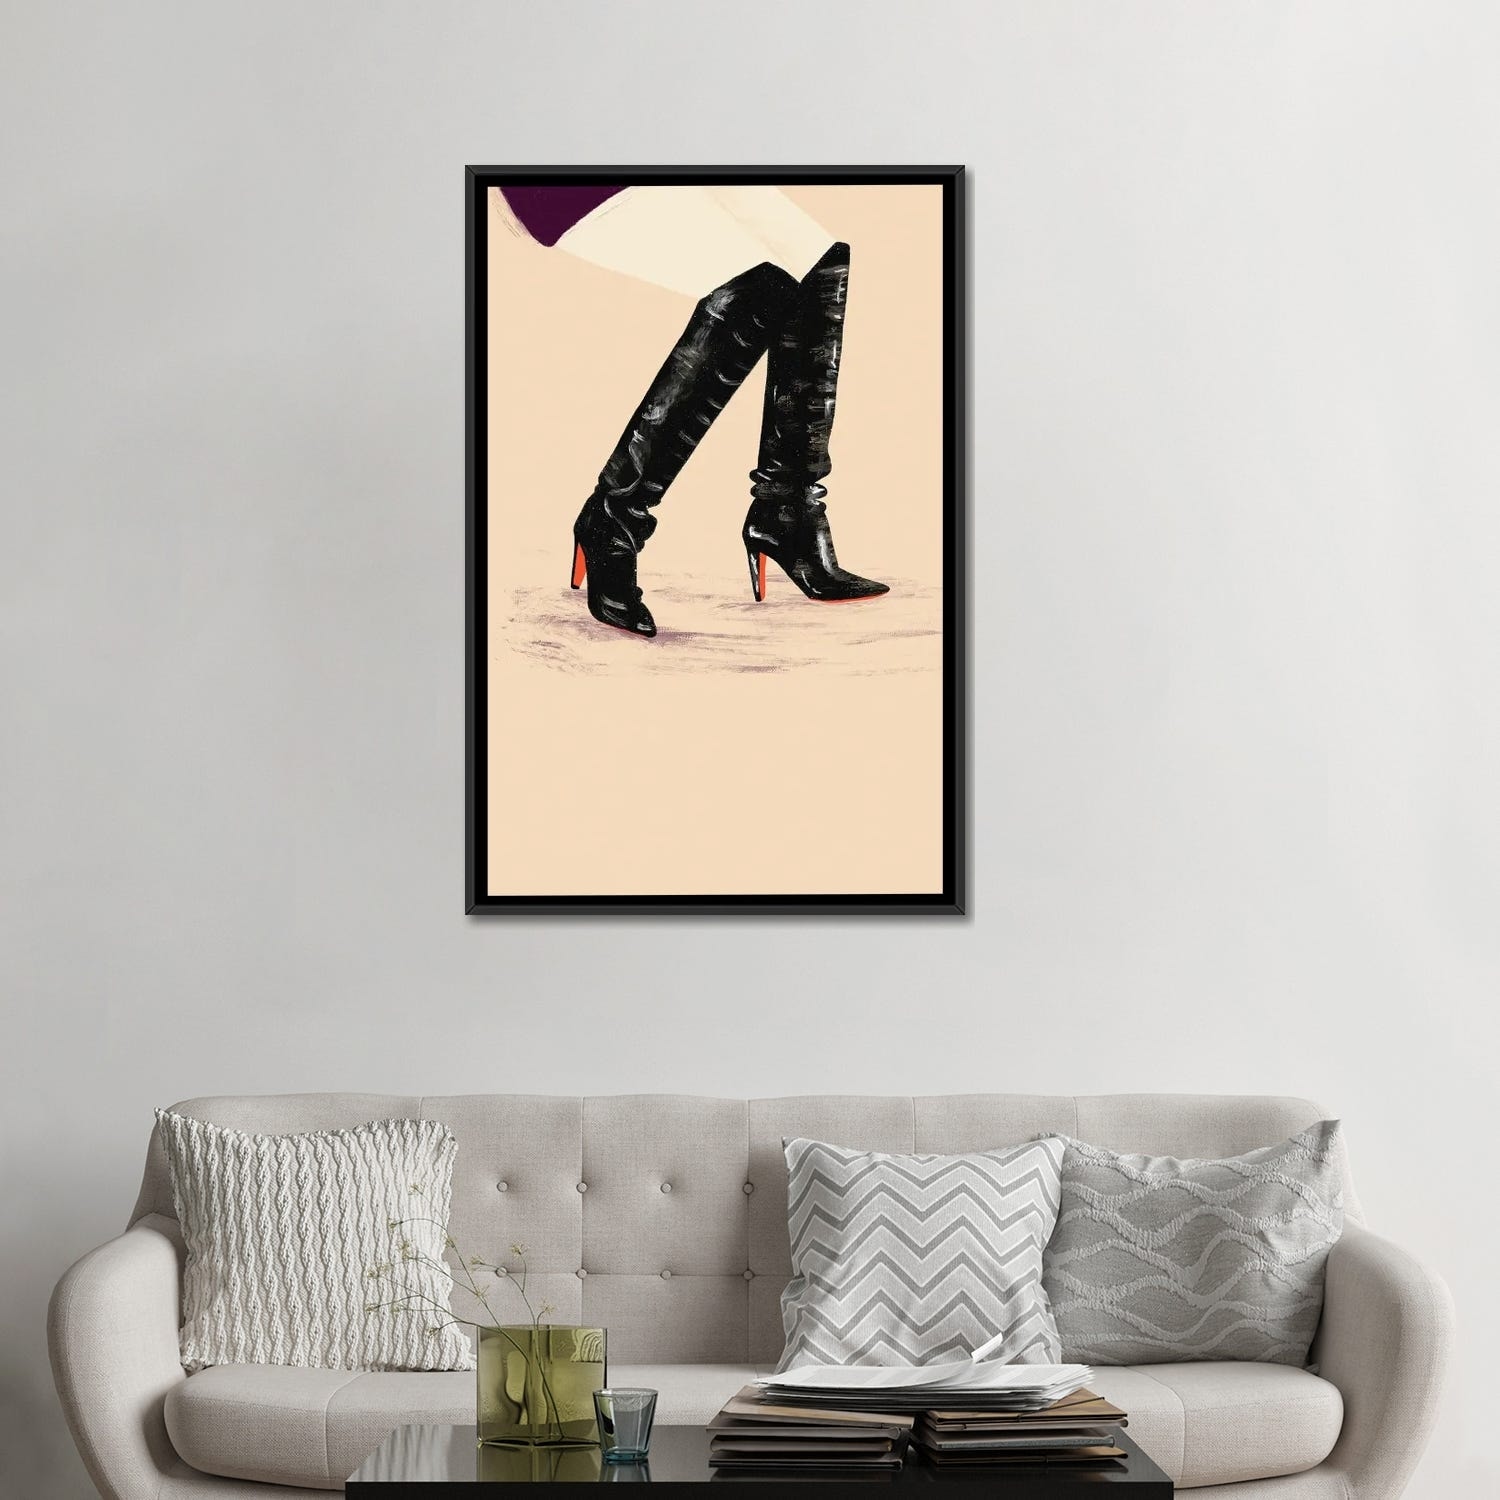 iCanvas Louboutin Boots by Ludivine Josephine - Bed Bath